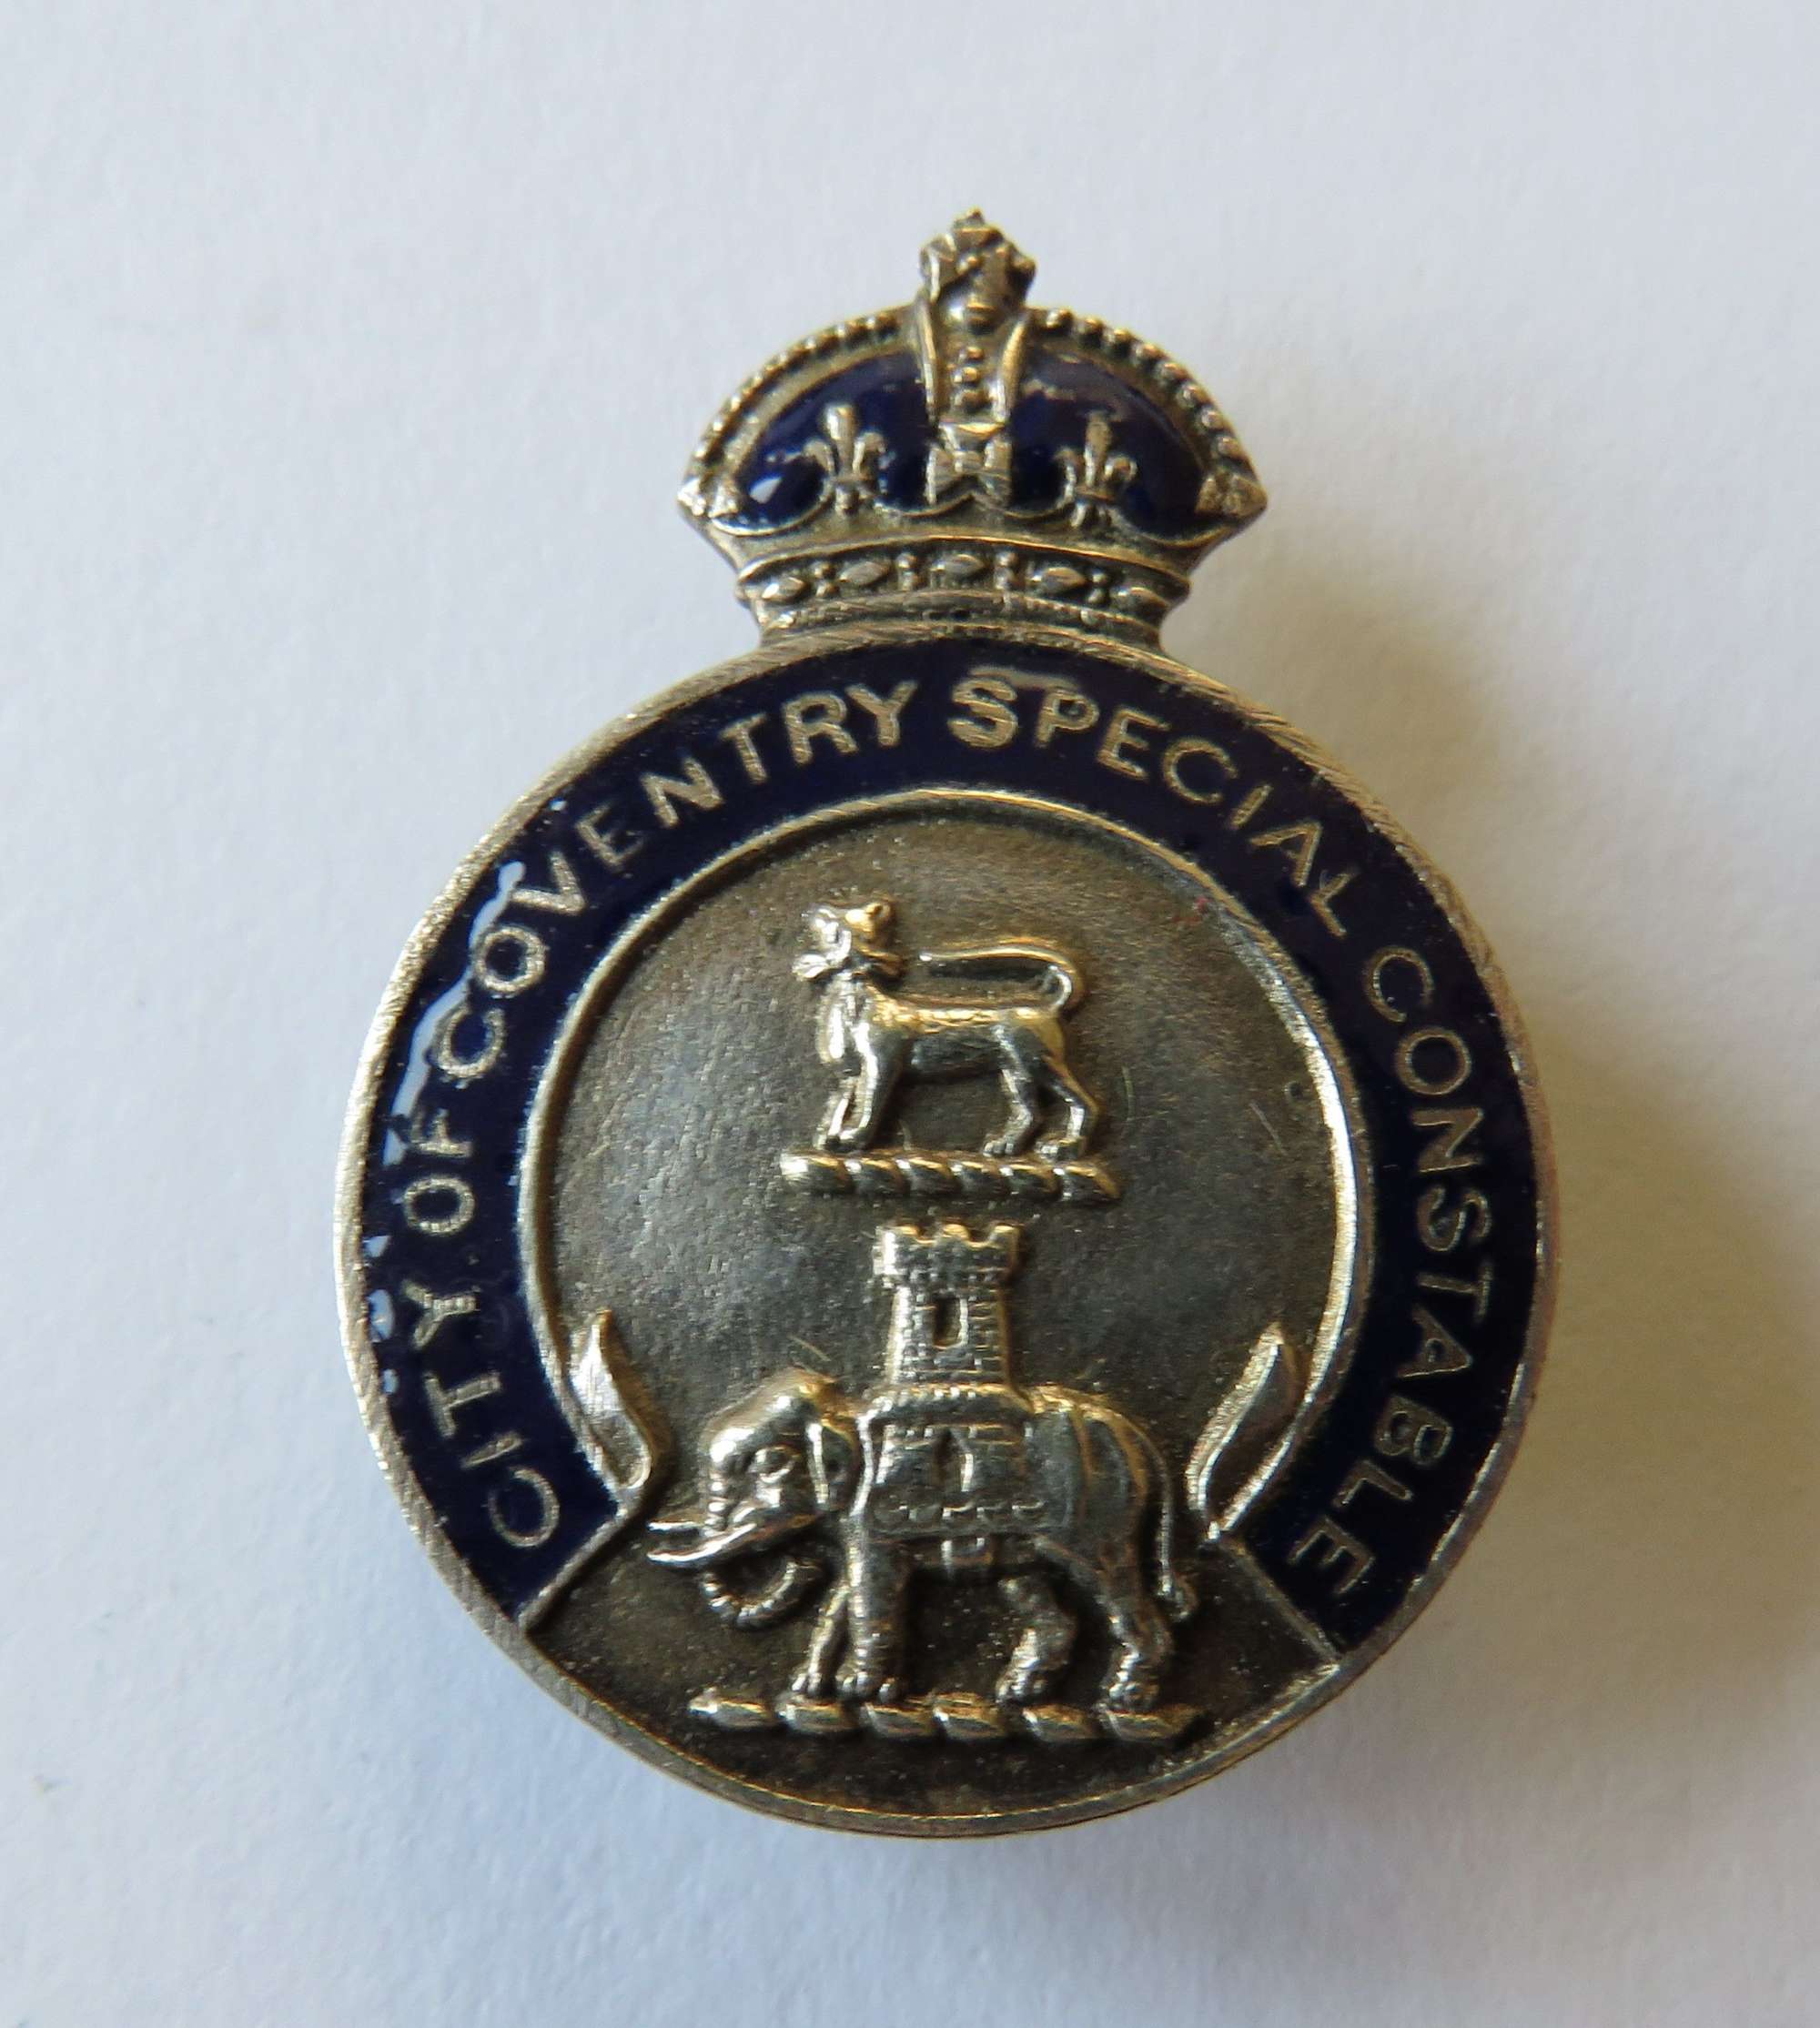 Coventry Special Constabulary Lapel Badge